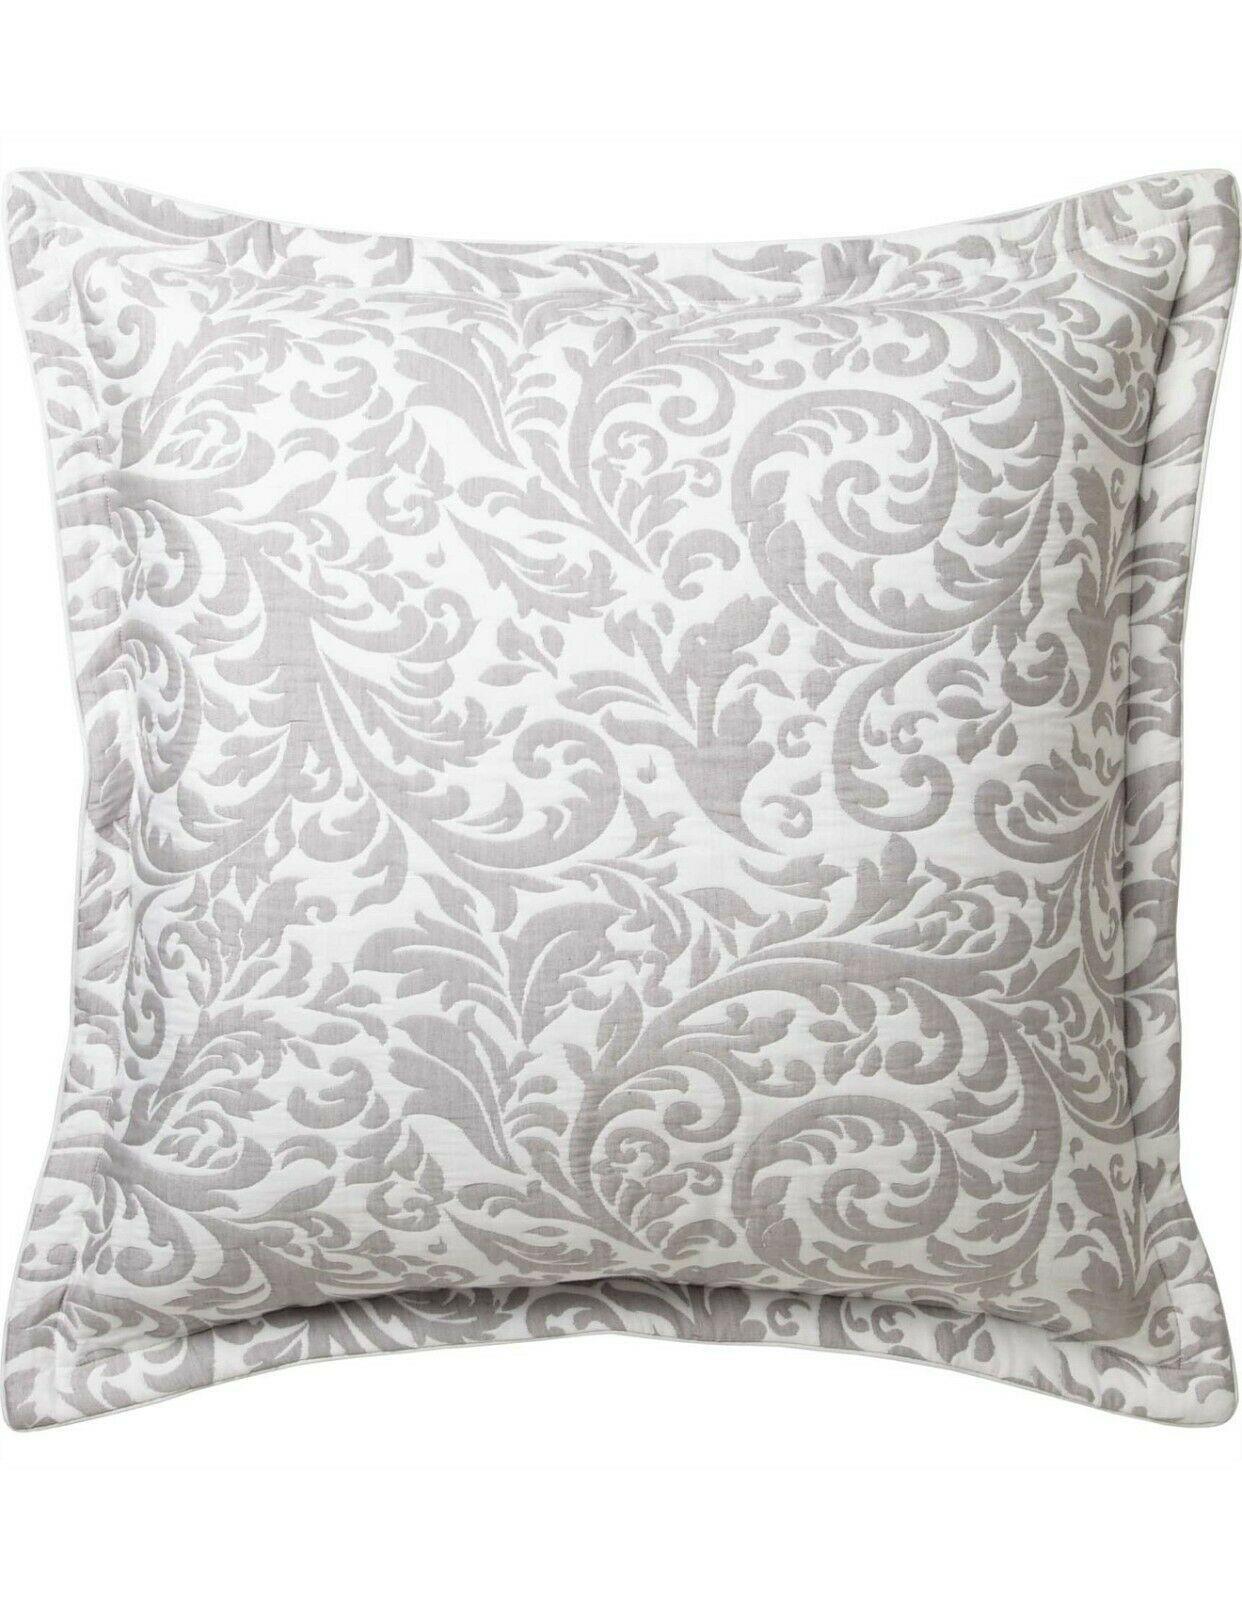 Private Collection NEWBURY SILVER European Pillowcover Cover